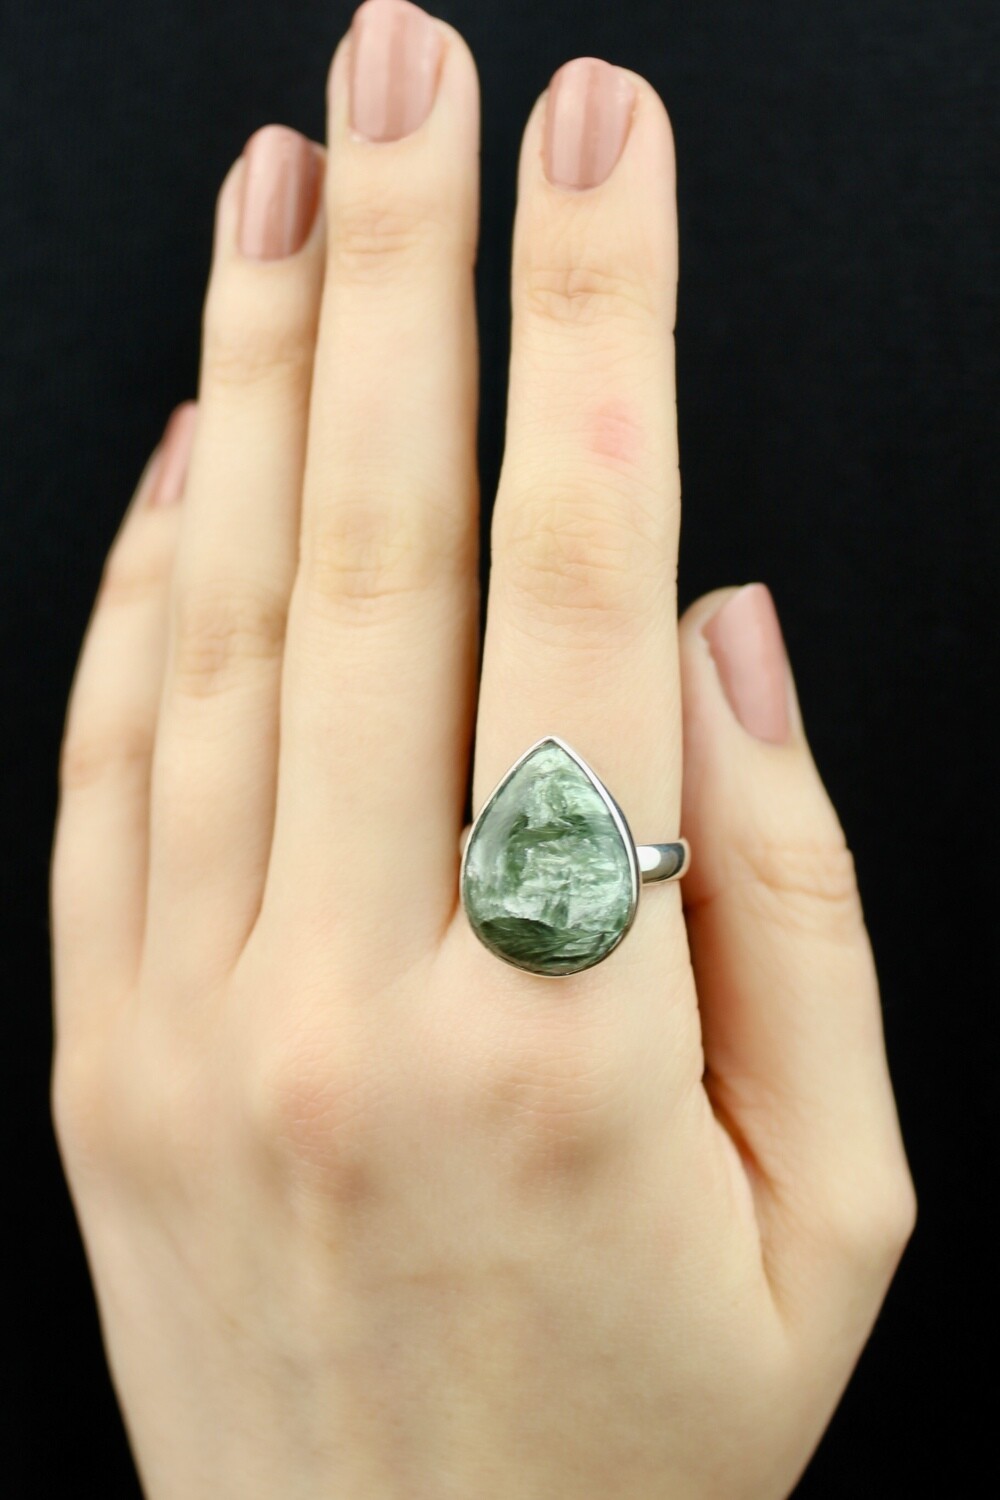 SIZE 9.25 - Sterling Silver Seraphinite Teardrop Ring - RIG9102